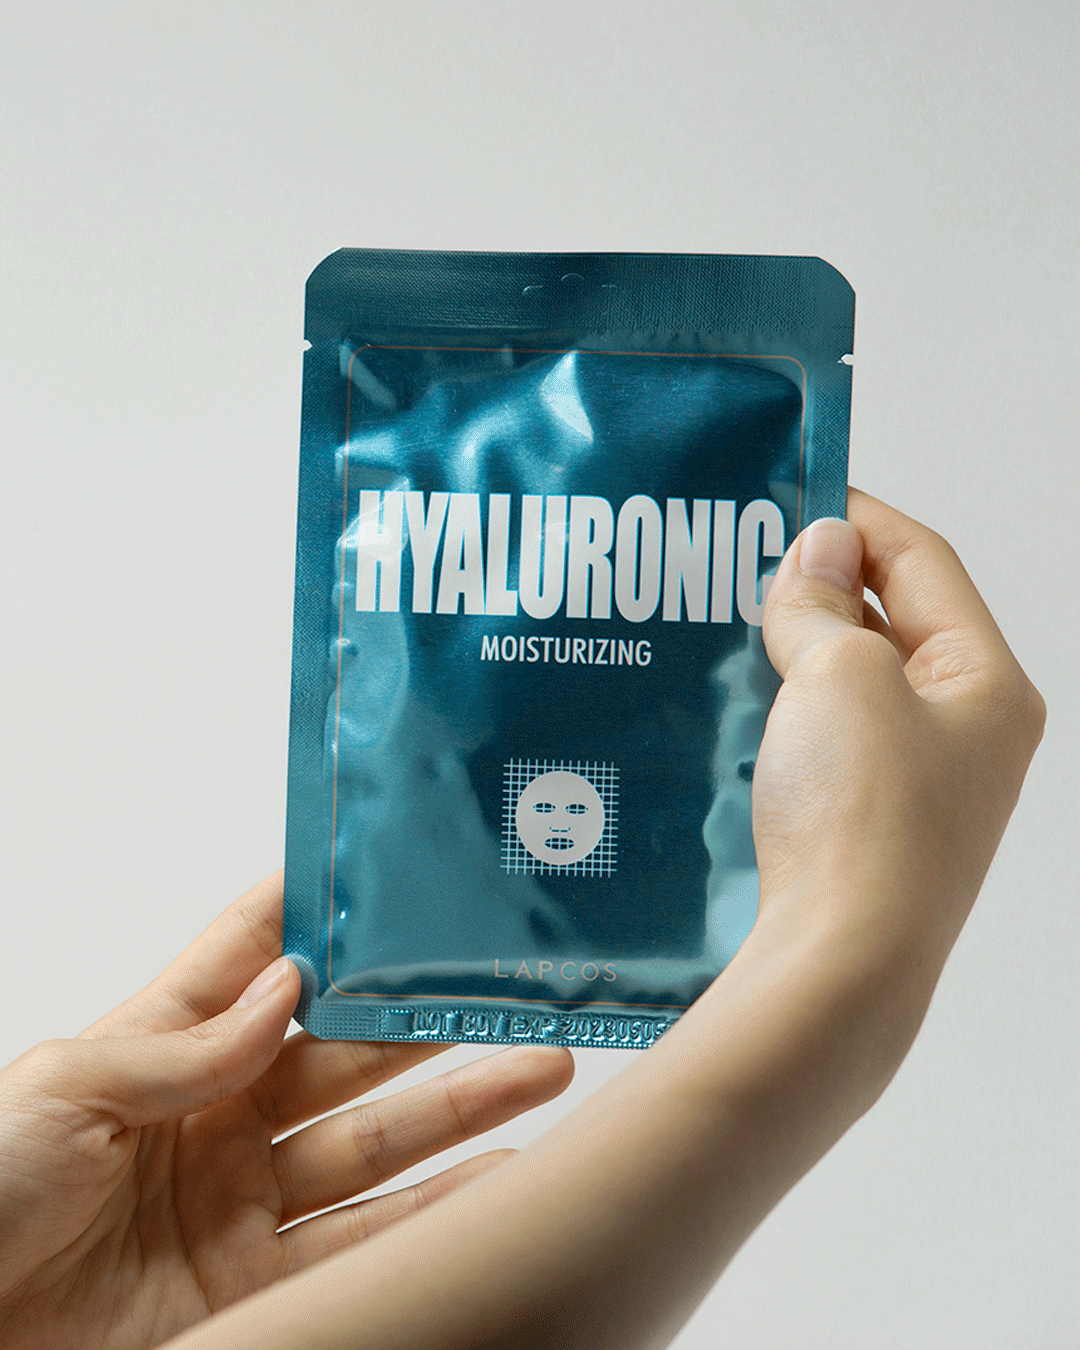 Model's hands open a Hyaluronic Moisturizing sheet mask packet and unfold the mask inside